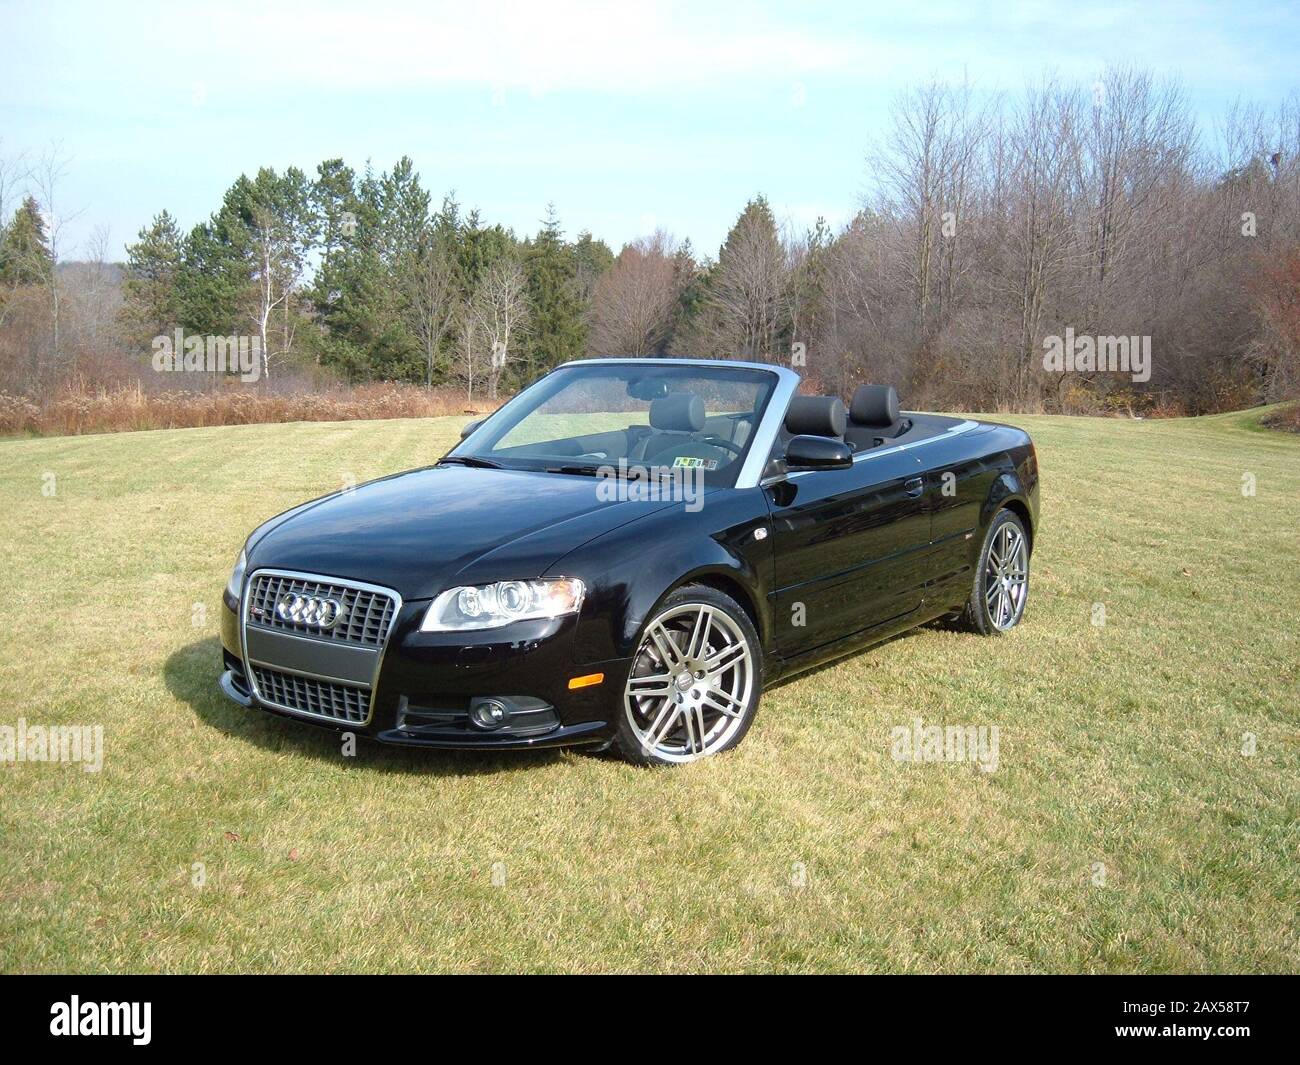 English Audi A4 Cabriolet With Upgraded S Line Package 22 April 2008 Original Upload Date Original Text June 18 2007 Own Work Original Text Self Made Ferrantep2 Talk Stock Photo Alamy